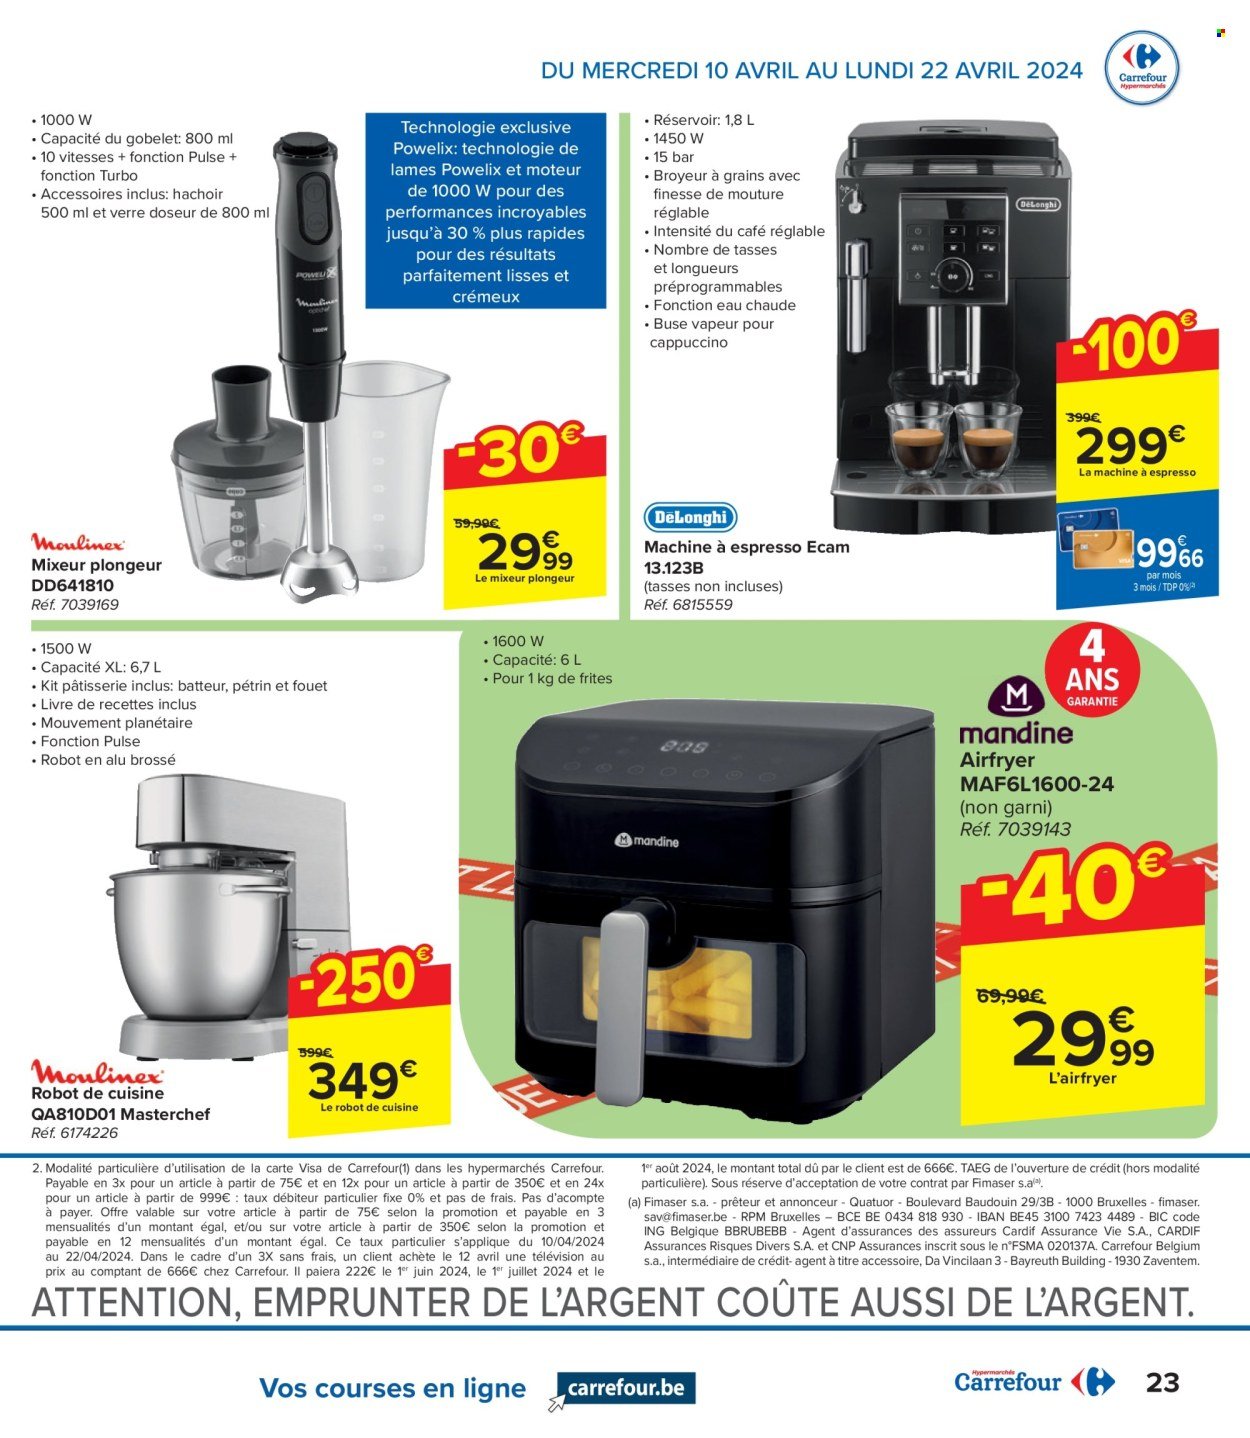 Catalogue Carrefour hypermarkt - 10.4.2024 - 22.4.2024. Page 23.